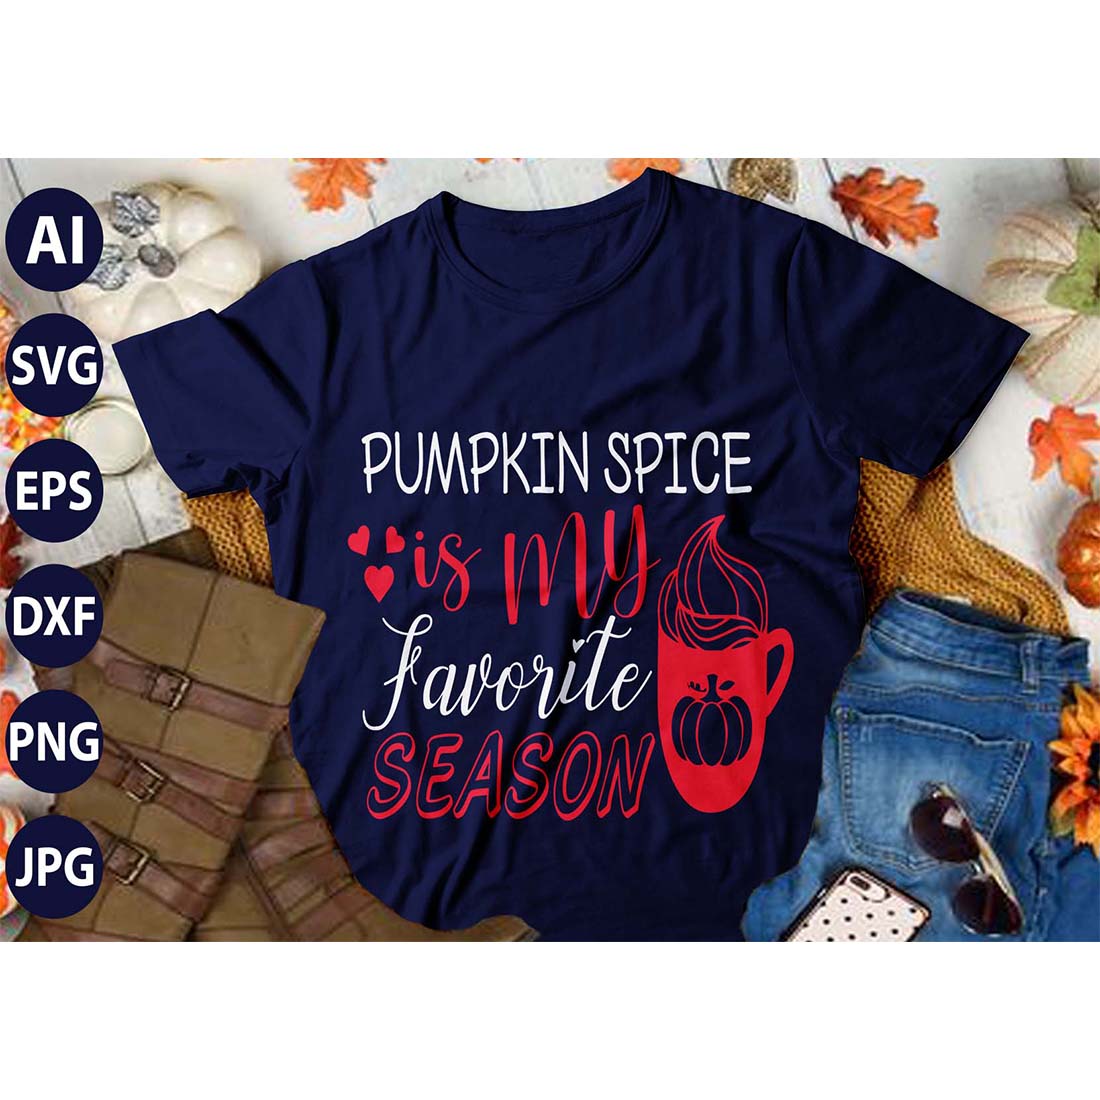 Pumpkin Spice is my Favorite Season, SVG T-Shirt Design |Happy Halloween & Pumpkin T-Shirt Design | Ai, Svg, Eps, Dxf, Jpeg, Png, Instant download T-Shirt | 100% print-ready Digital vector file cover image.